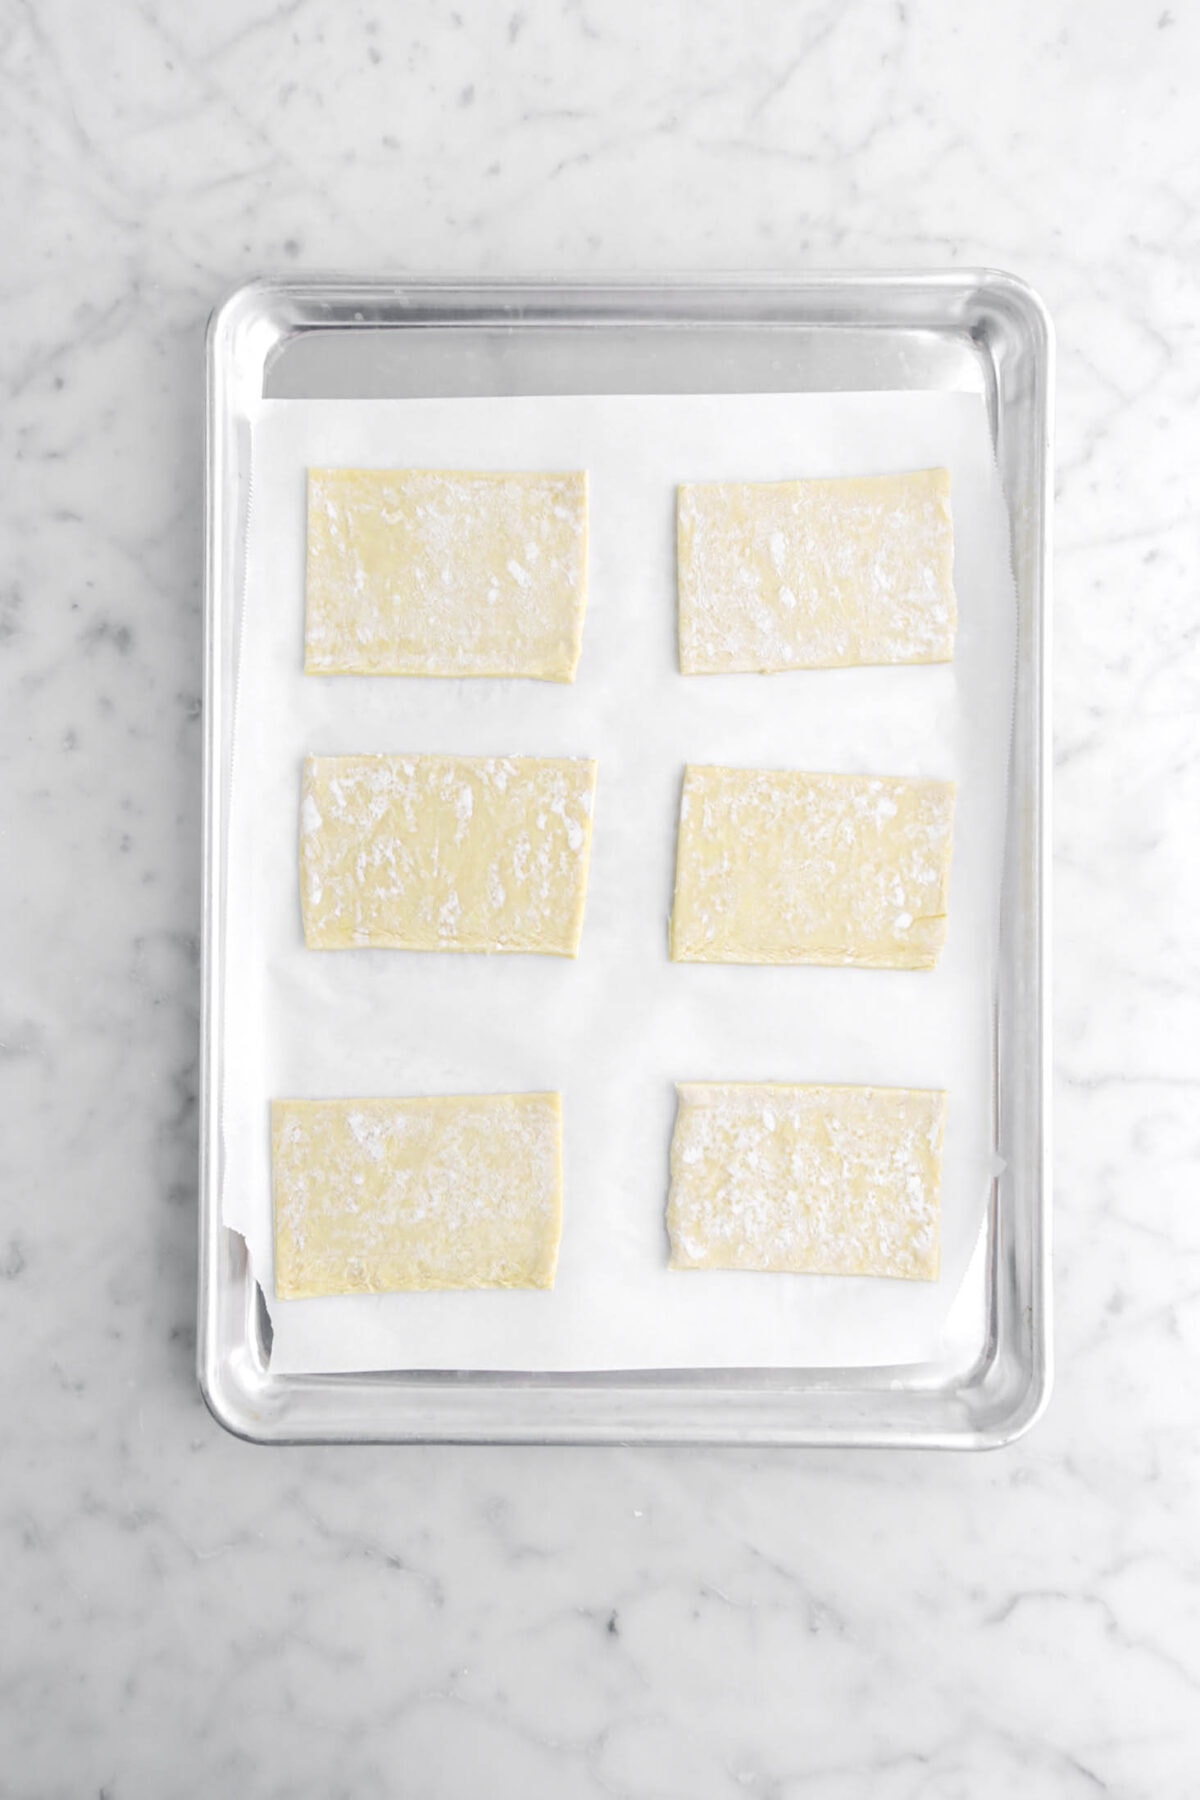 six rectangles of puff pastry on lined sheet pan.